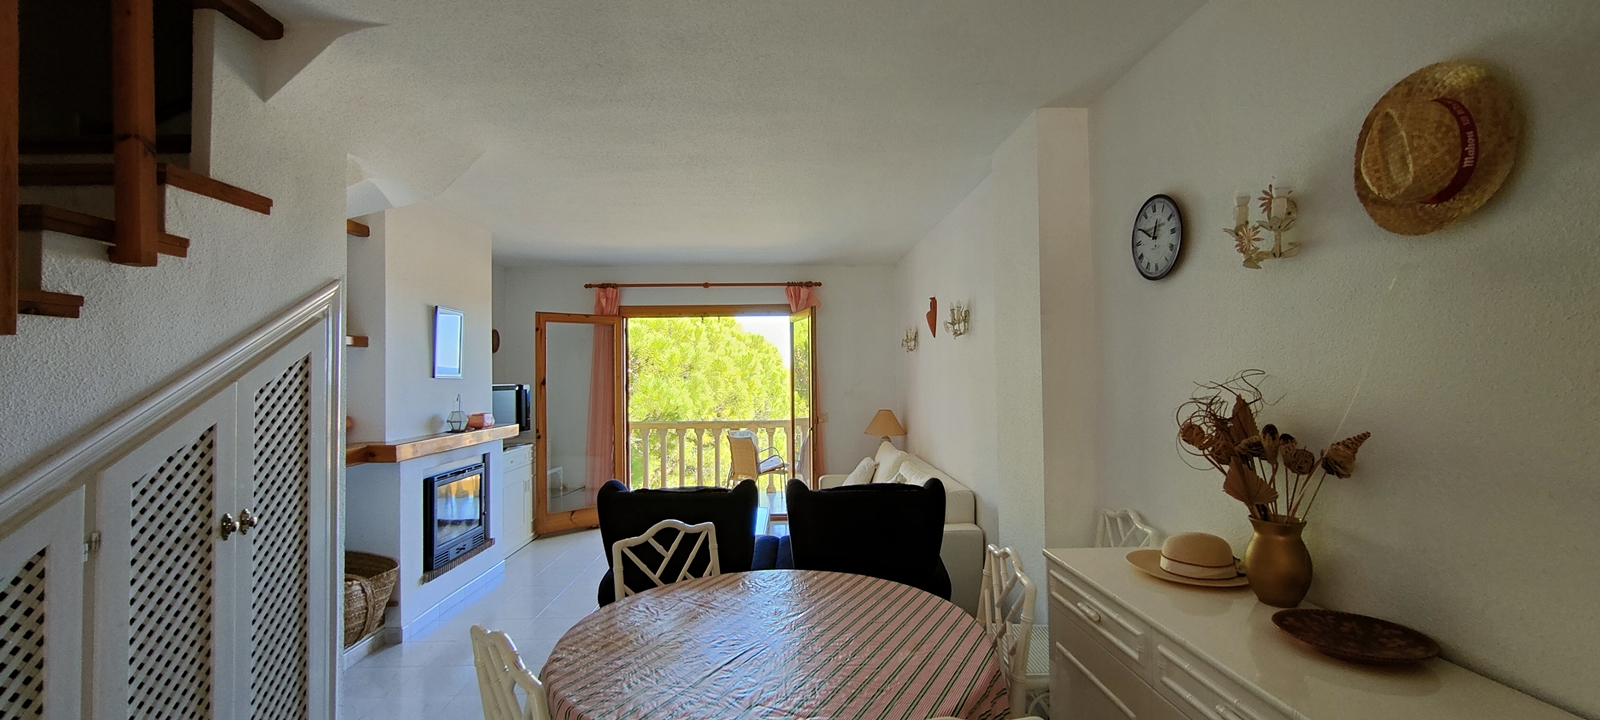 Semi-detached house for sale in Dénia